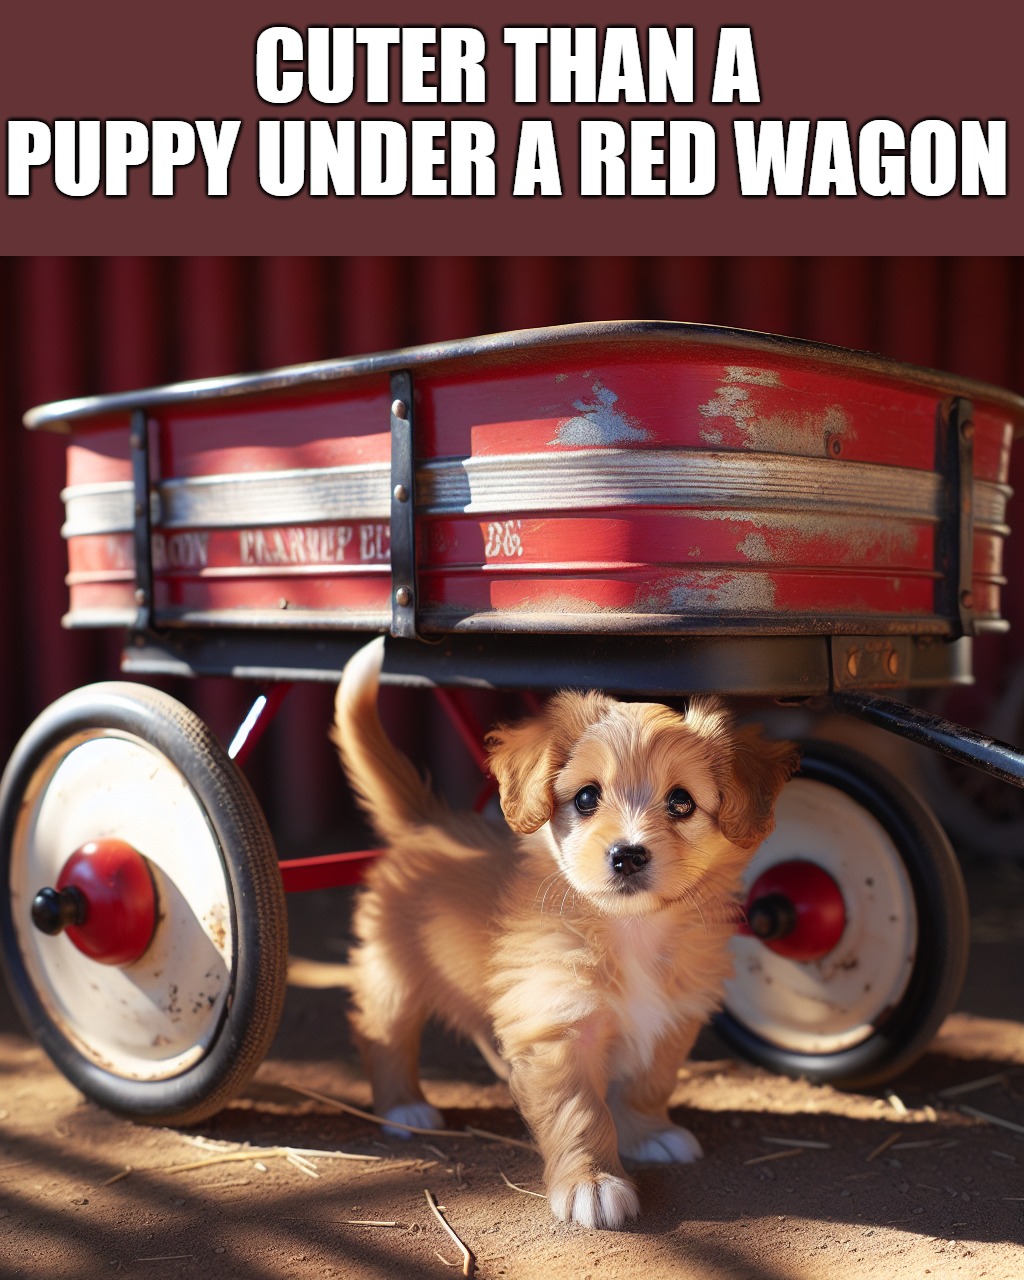 CUTER THAN A PUPPY UNDER A RED WAGON | made w/ Imgflip meme maker